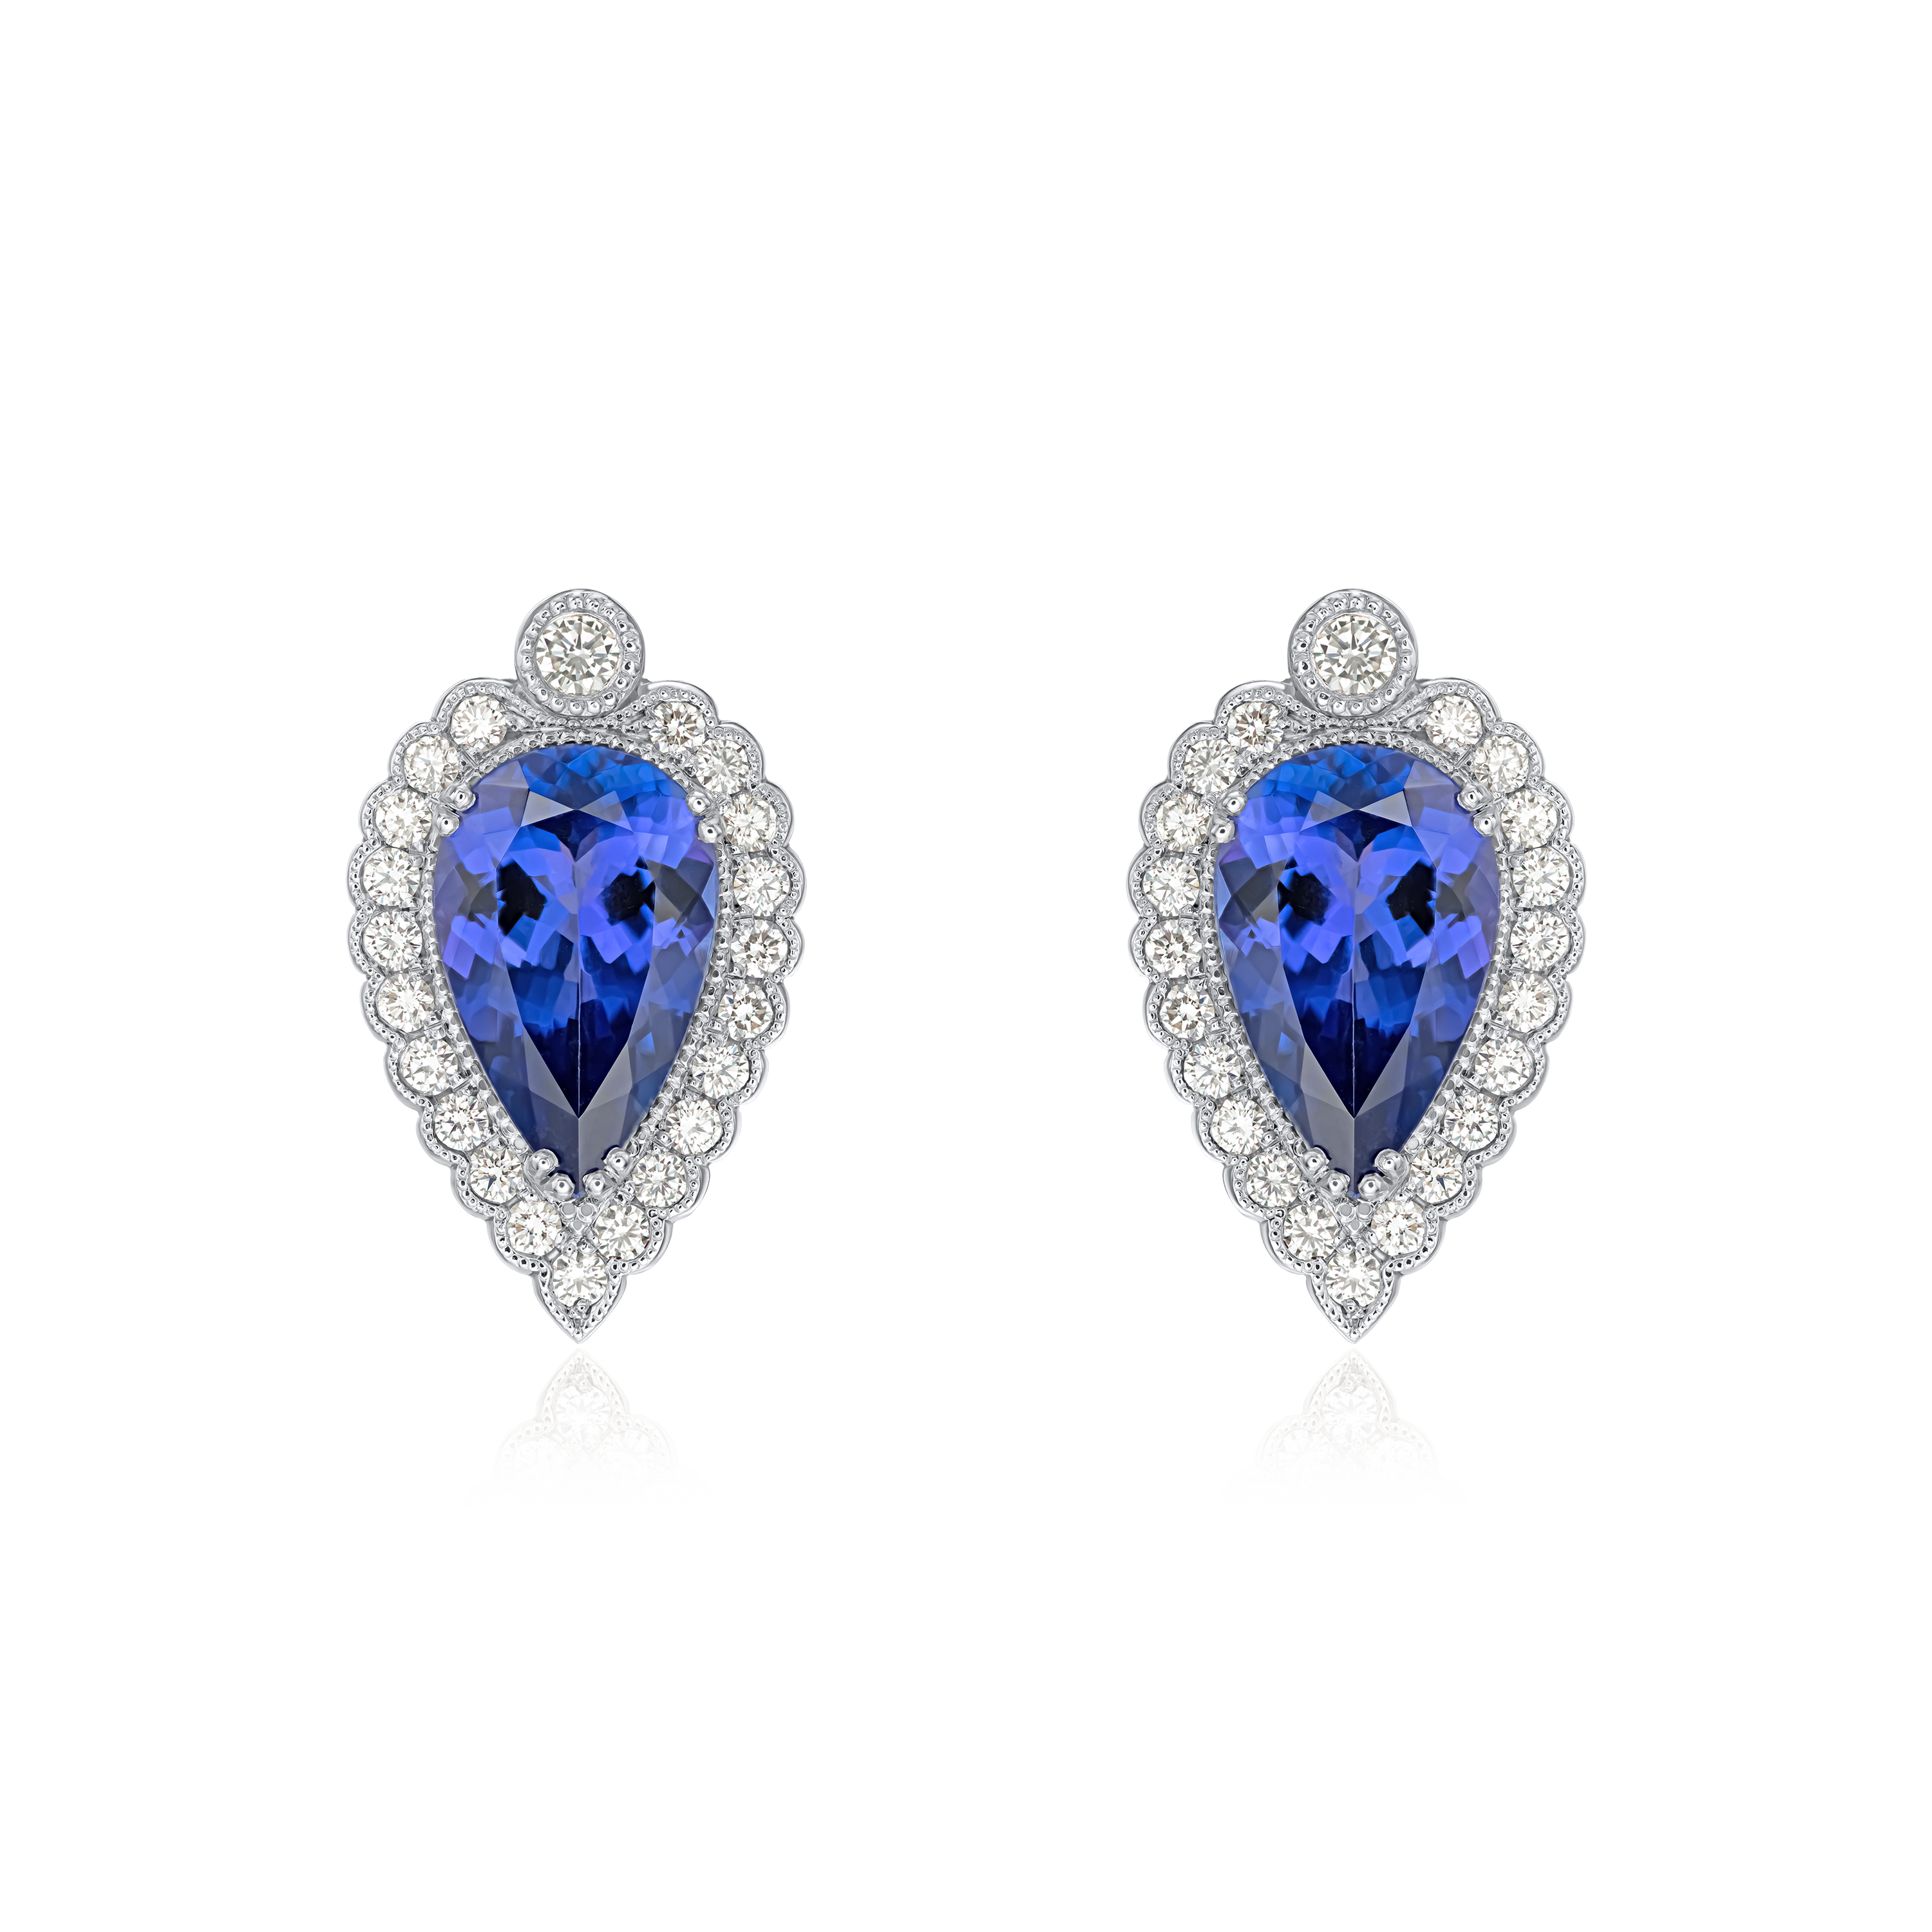 9.09cts Tanzanite and Diamond Cluster Earrings